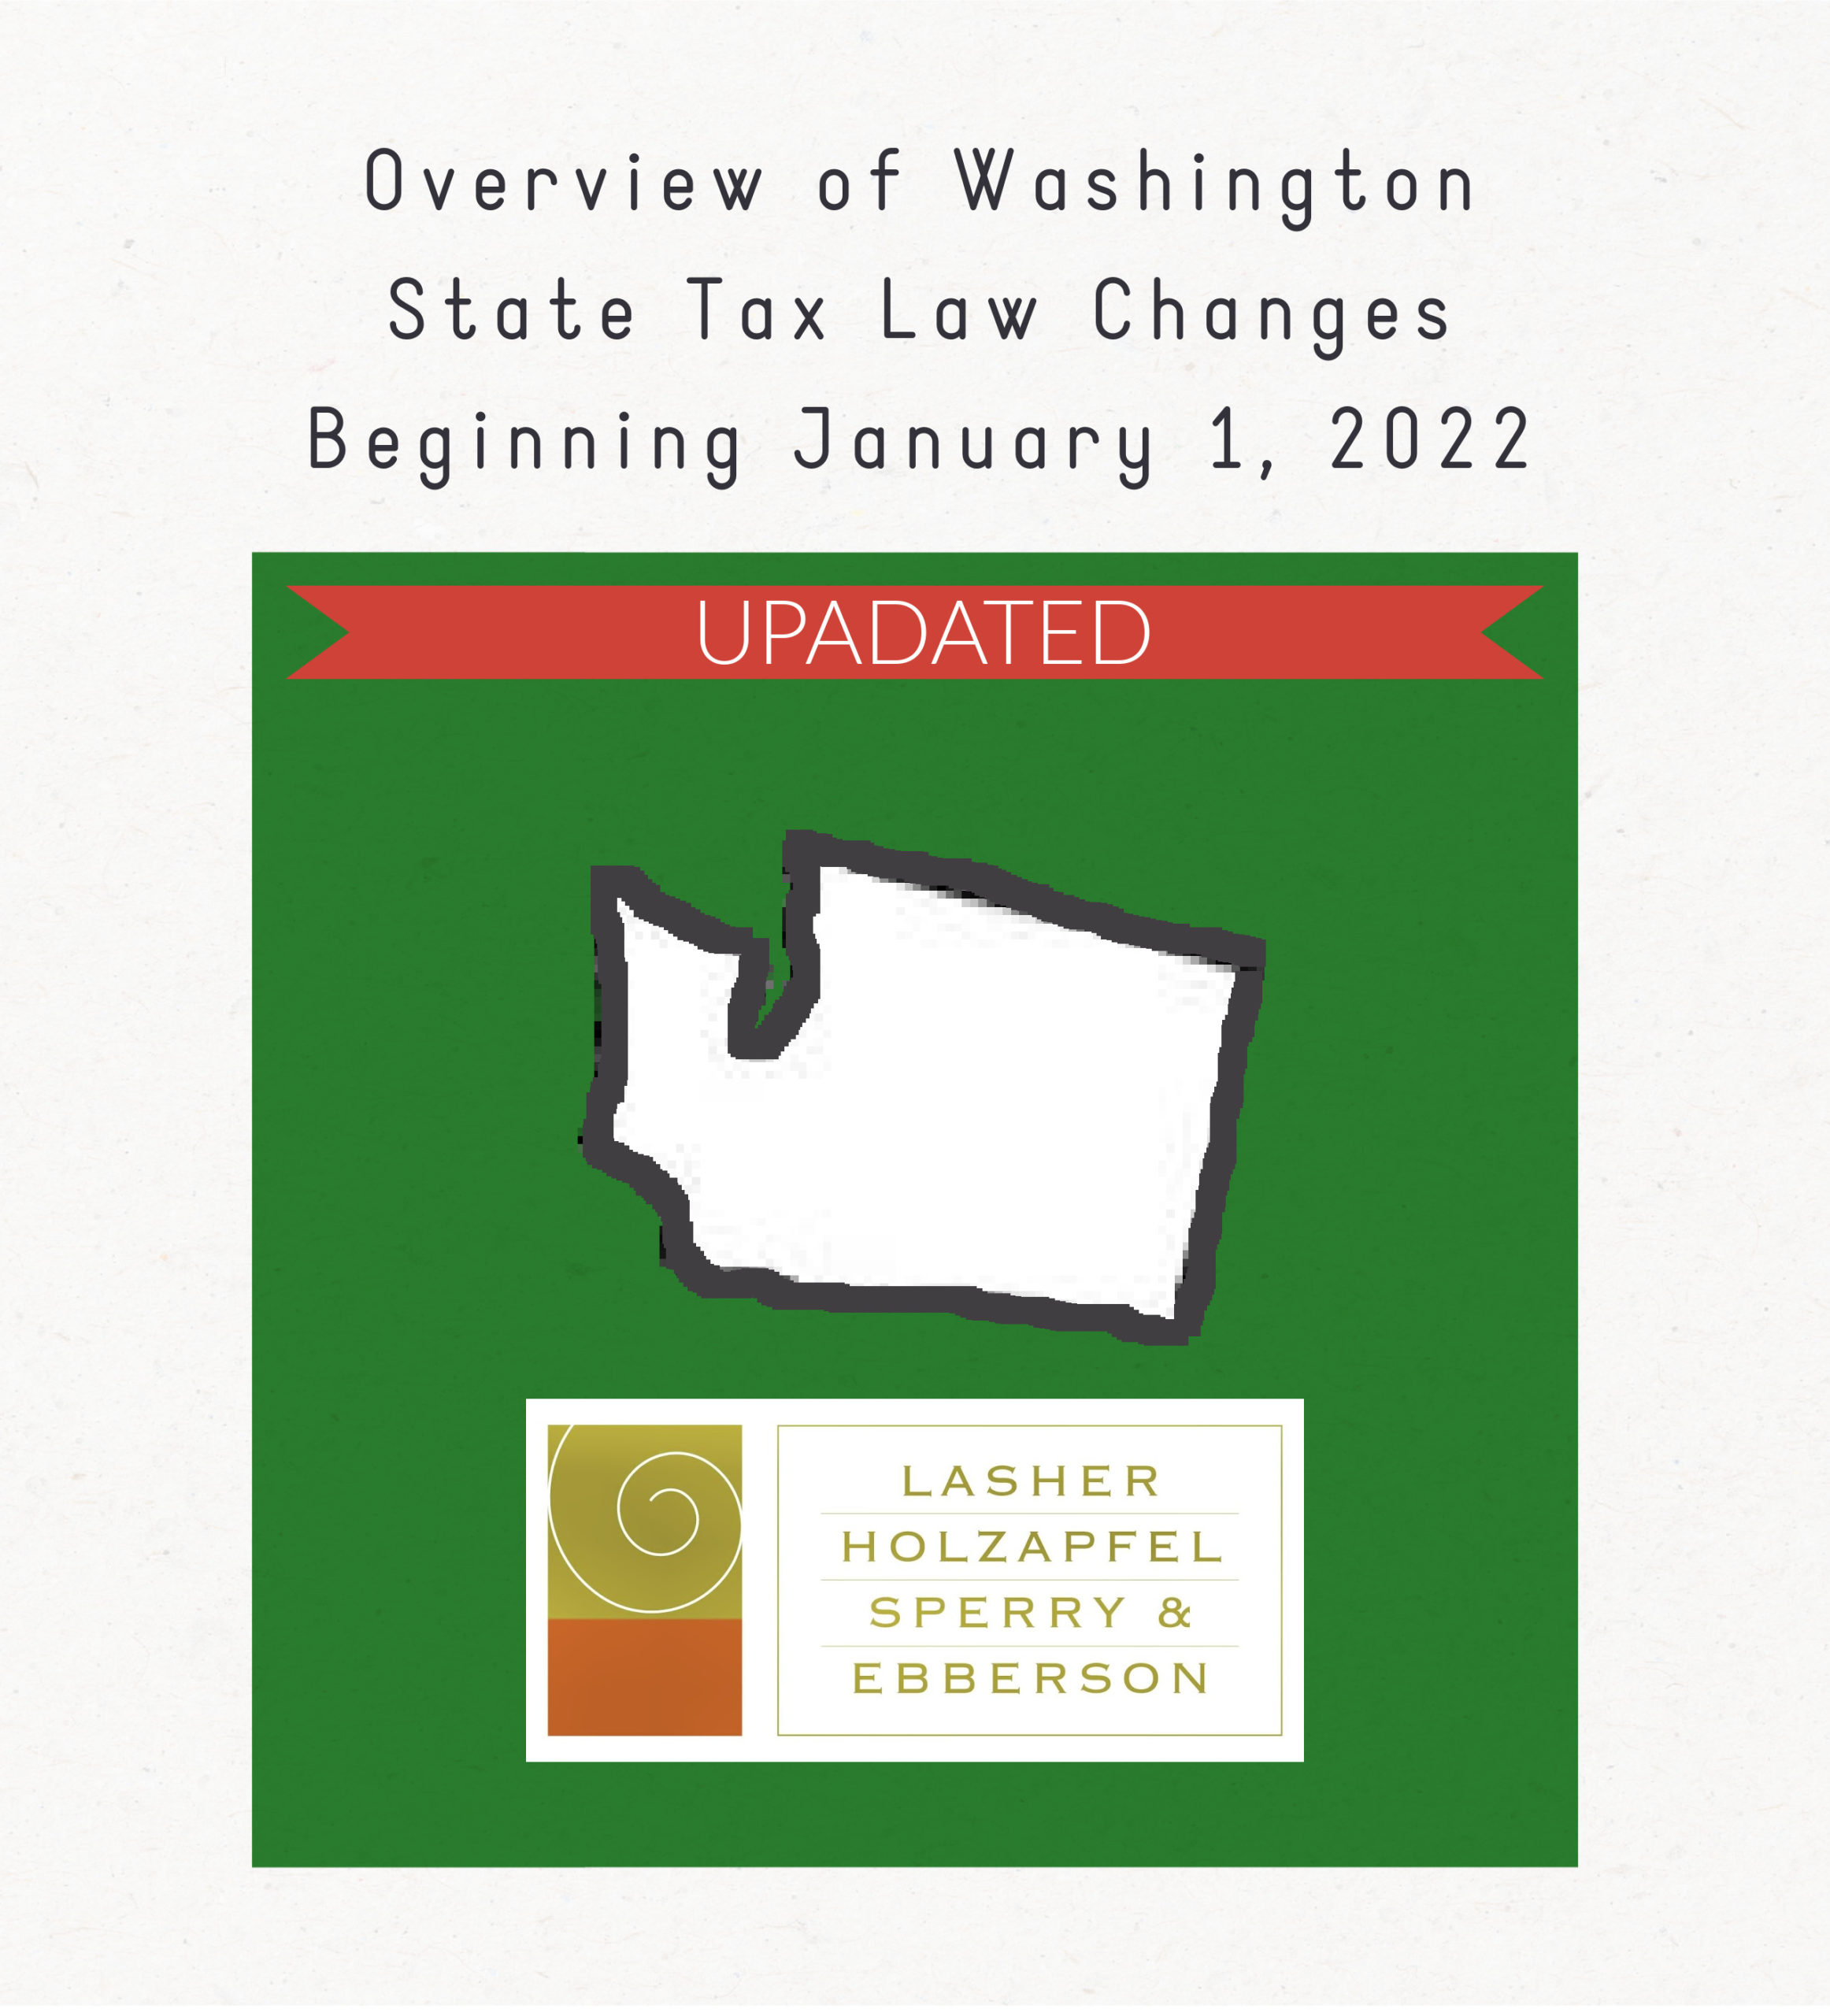 UPDATED: Overview of Washington State Tax Law Changes Beginning January 1, 2022